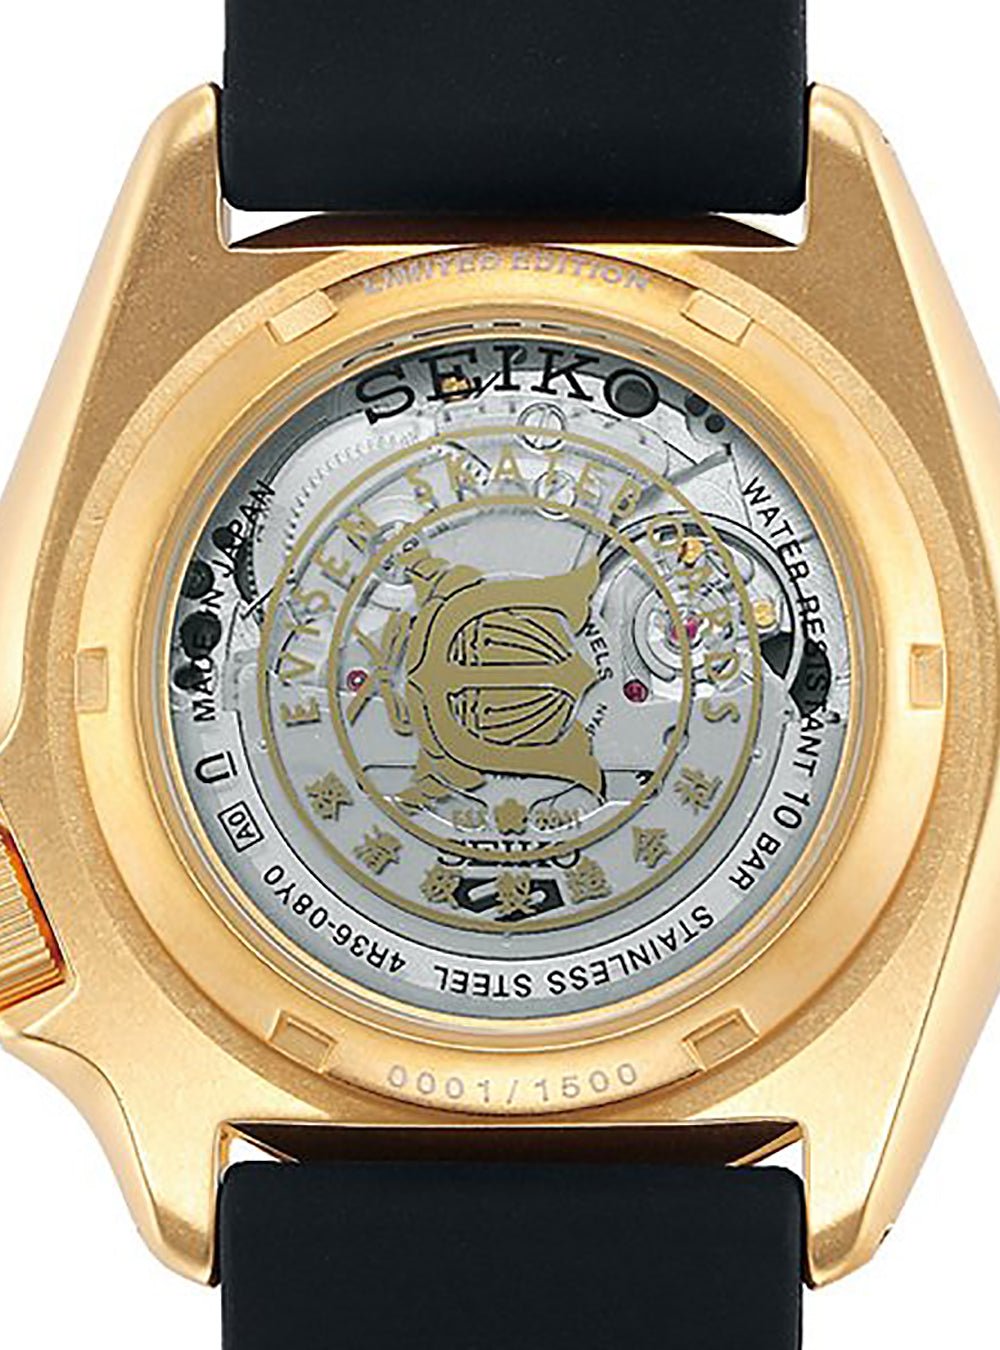 SEIKO 5 SPORTS × EVISEN SKATEBOARDS SBSA104 LIMITED EDITION MADE IN JAPAN JDMWRISTWATCHjapan-select